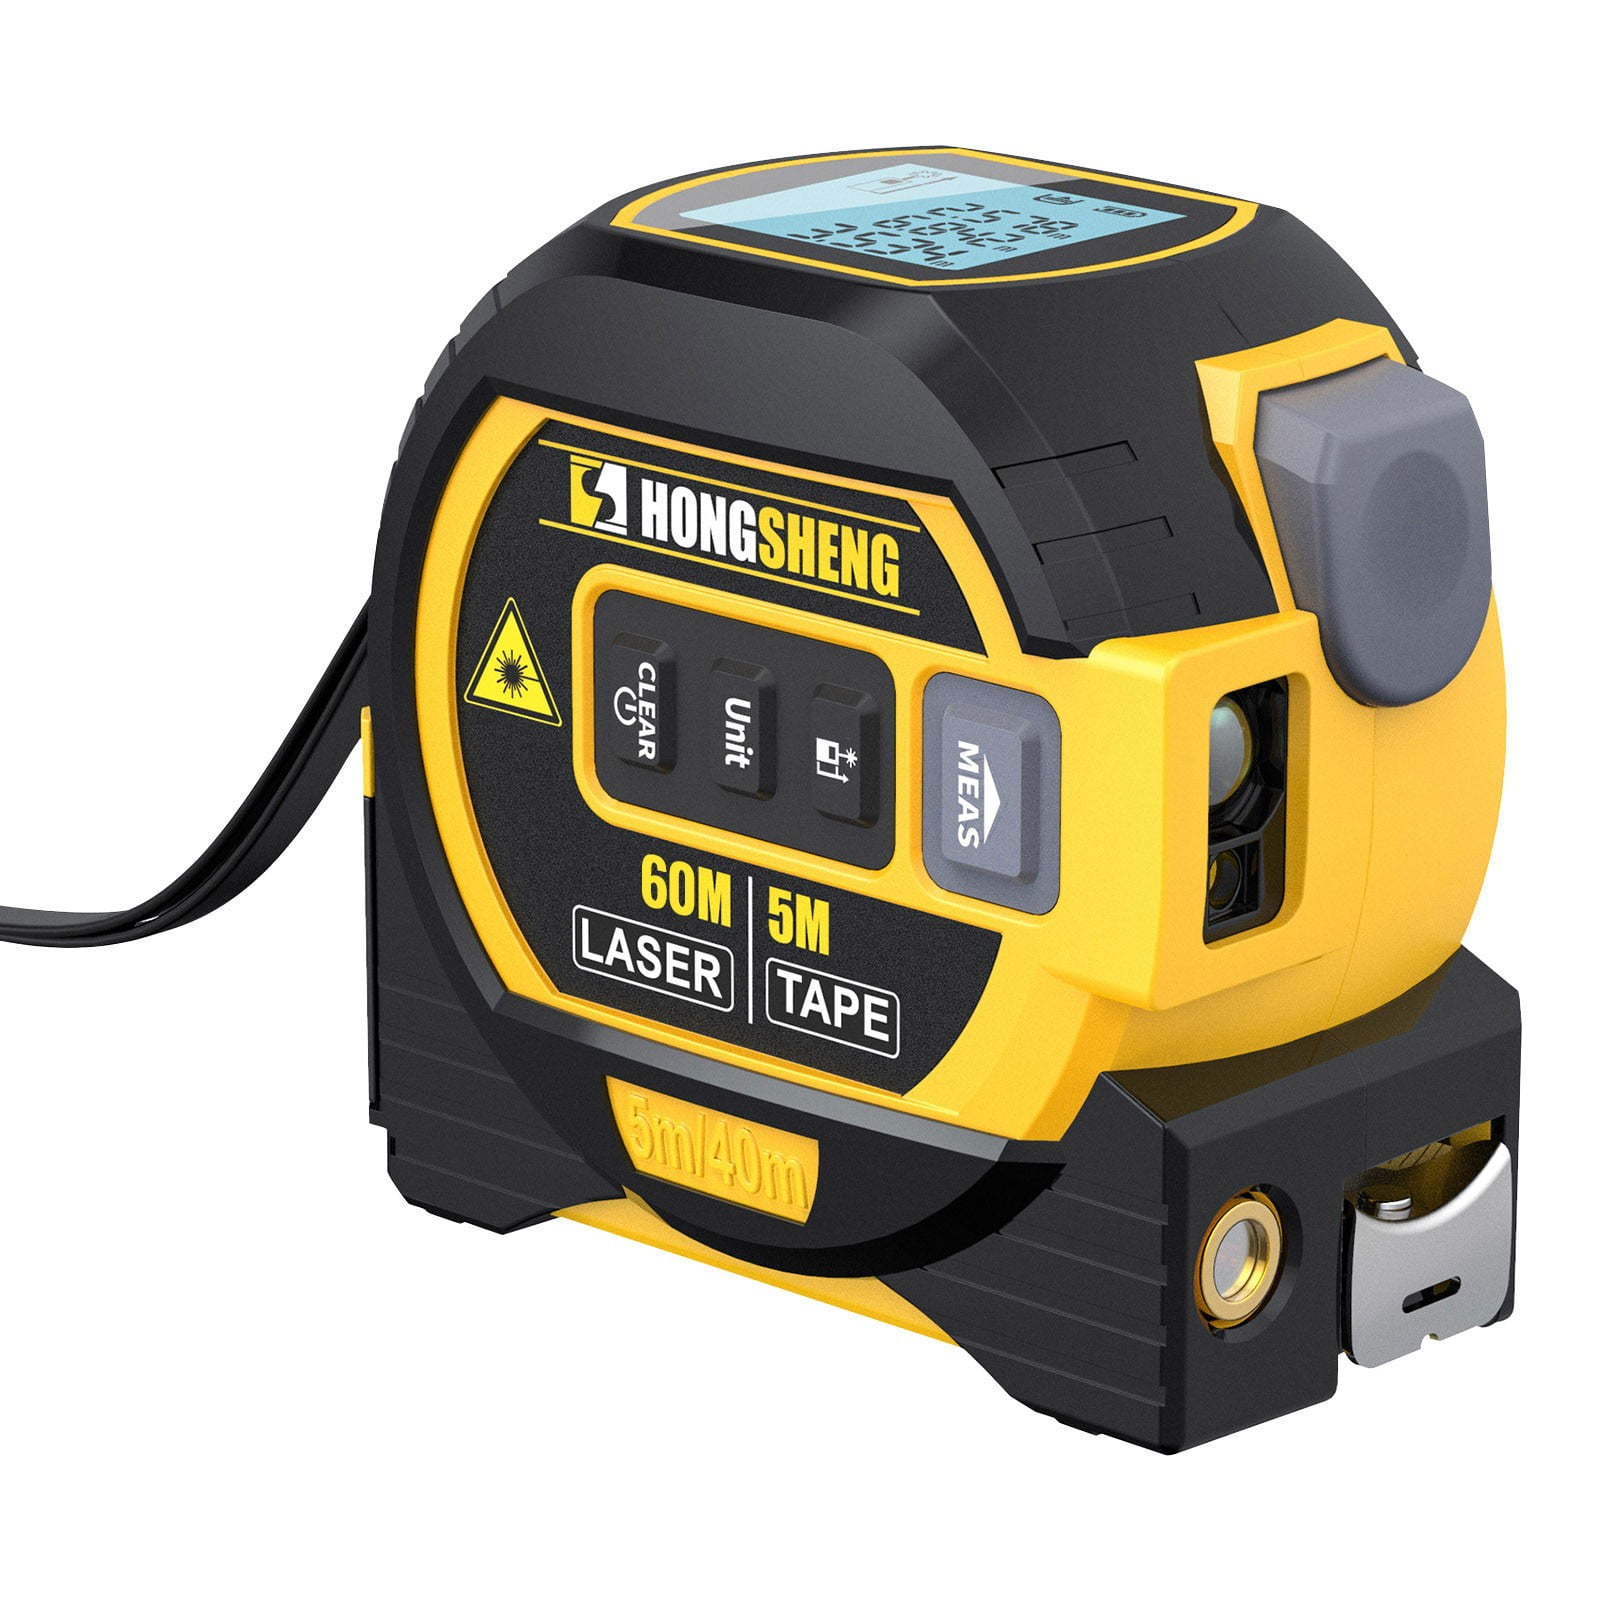 How to Choose the Best Digital Laser Tape Measure Brand